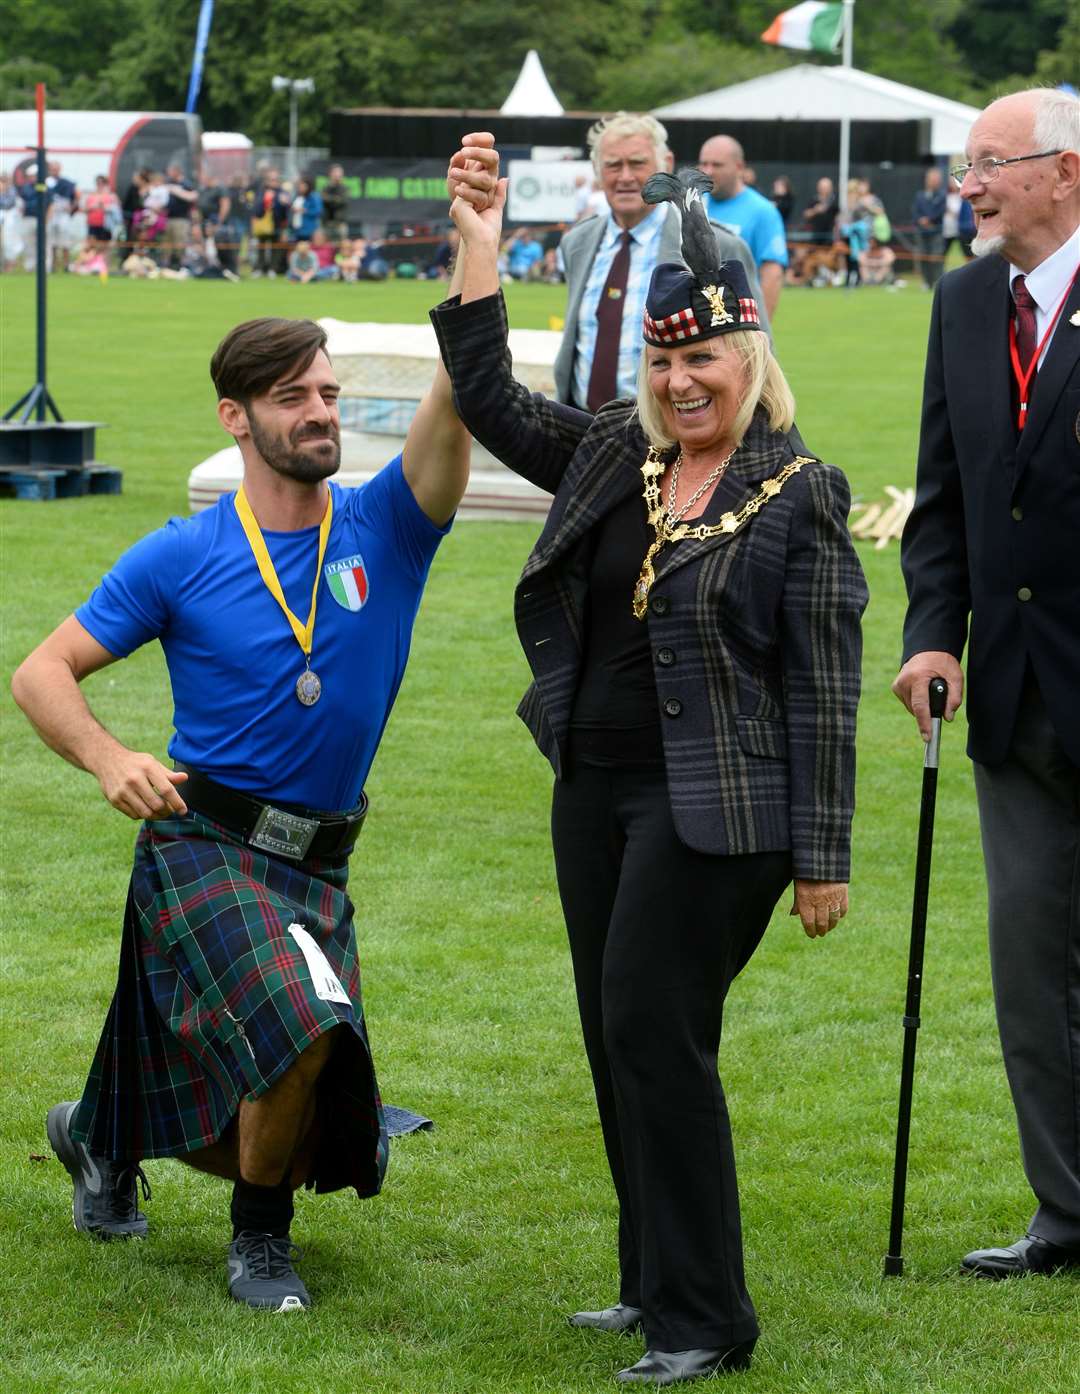 Inverness Highland Games 2018 at Bught Park. Guest heavy Mateo MacNeels recieves Worst Highland Dance award. Picture: Gary Anthony